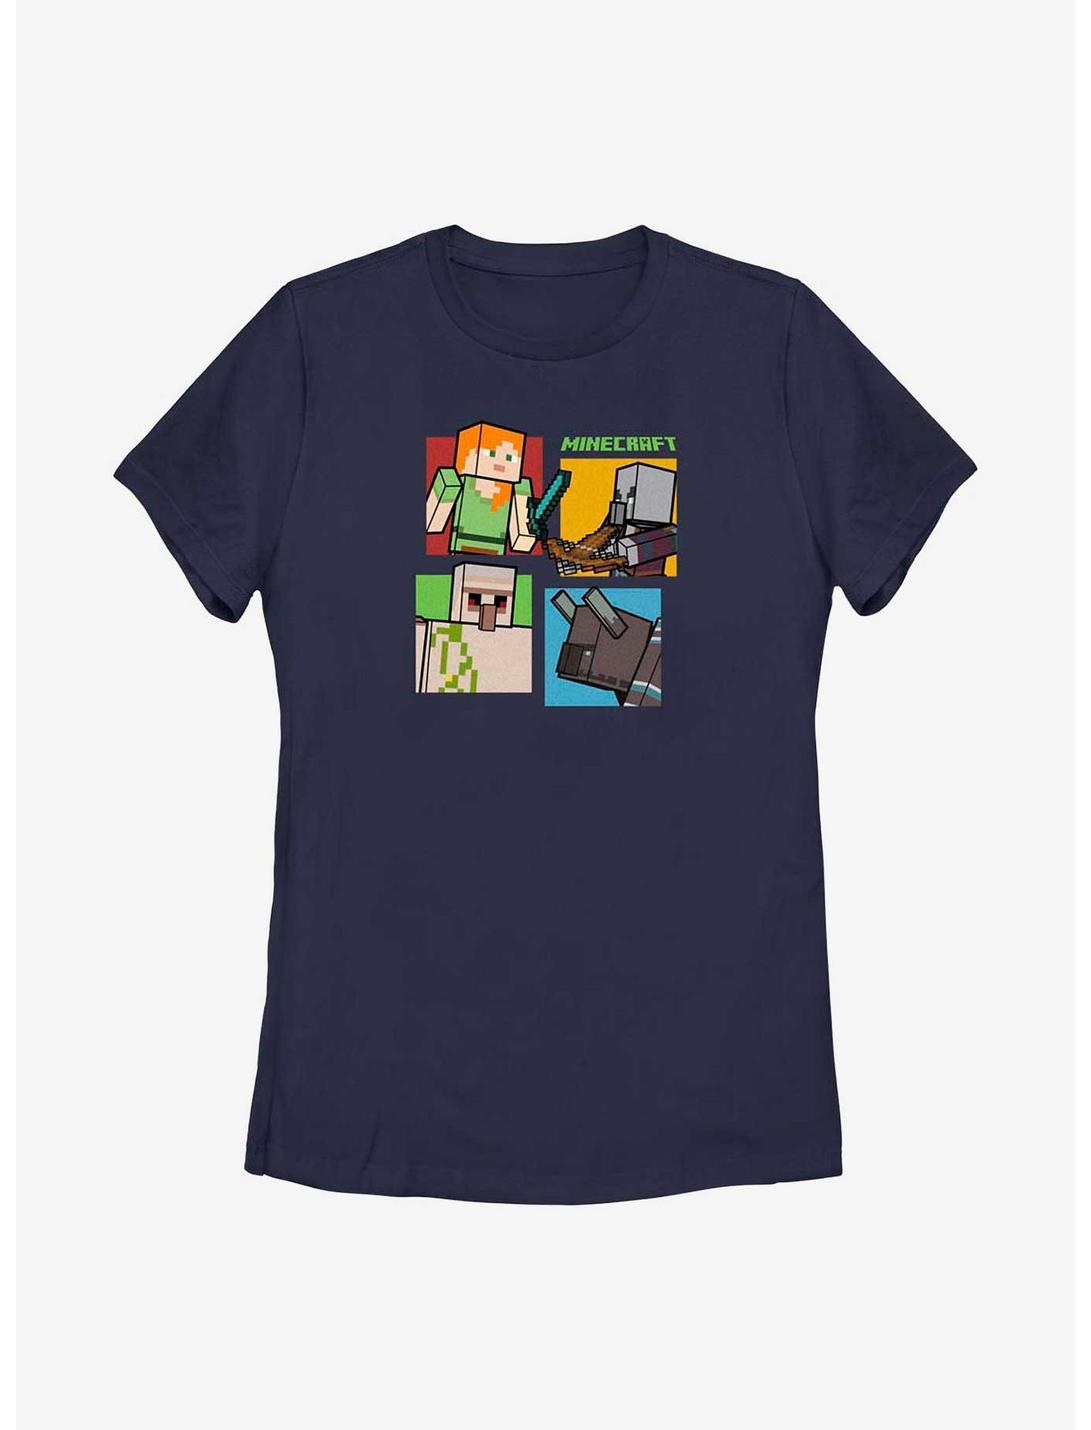 Minecraft Boxed In Womens T-Shirt, NAVY, hi-res